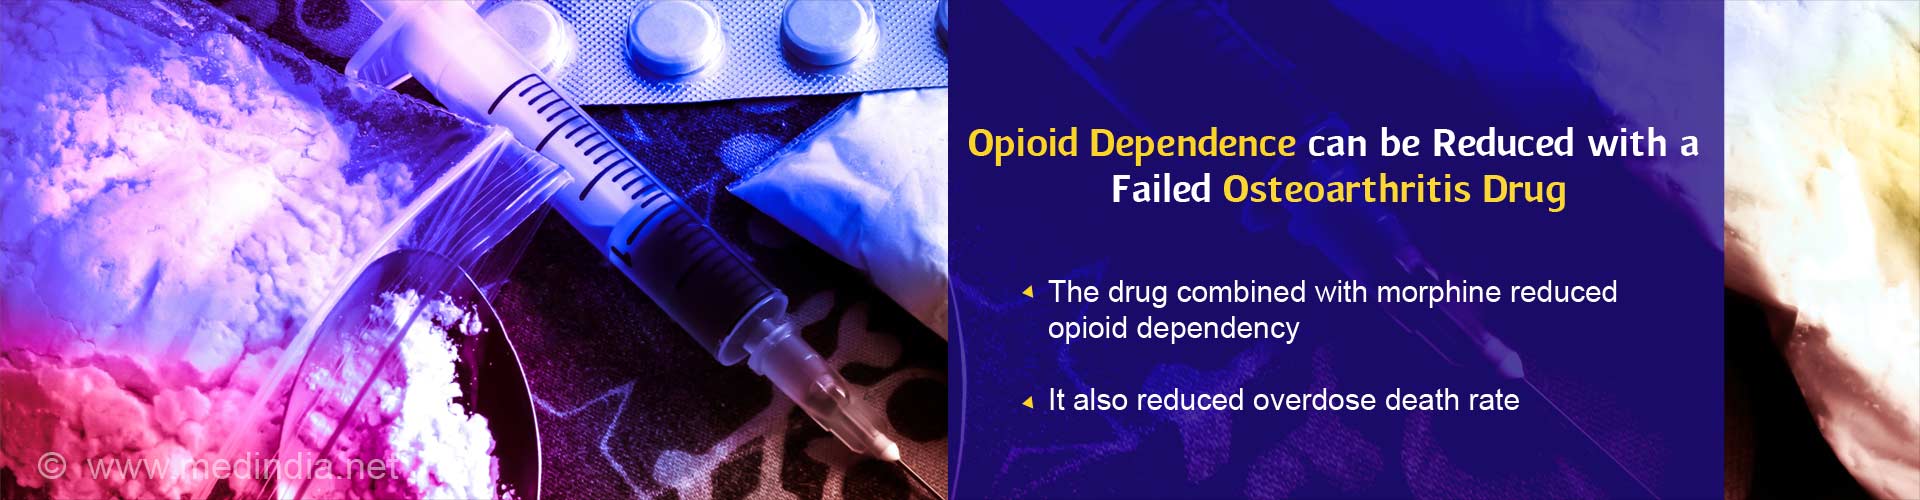 opioid dependence can be reduced with a failed osteoarthritis drug
- the drug combined with morphine reduced opioid dependency
- it also reduced overdose death rate